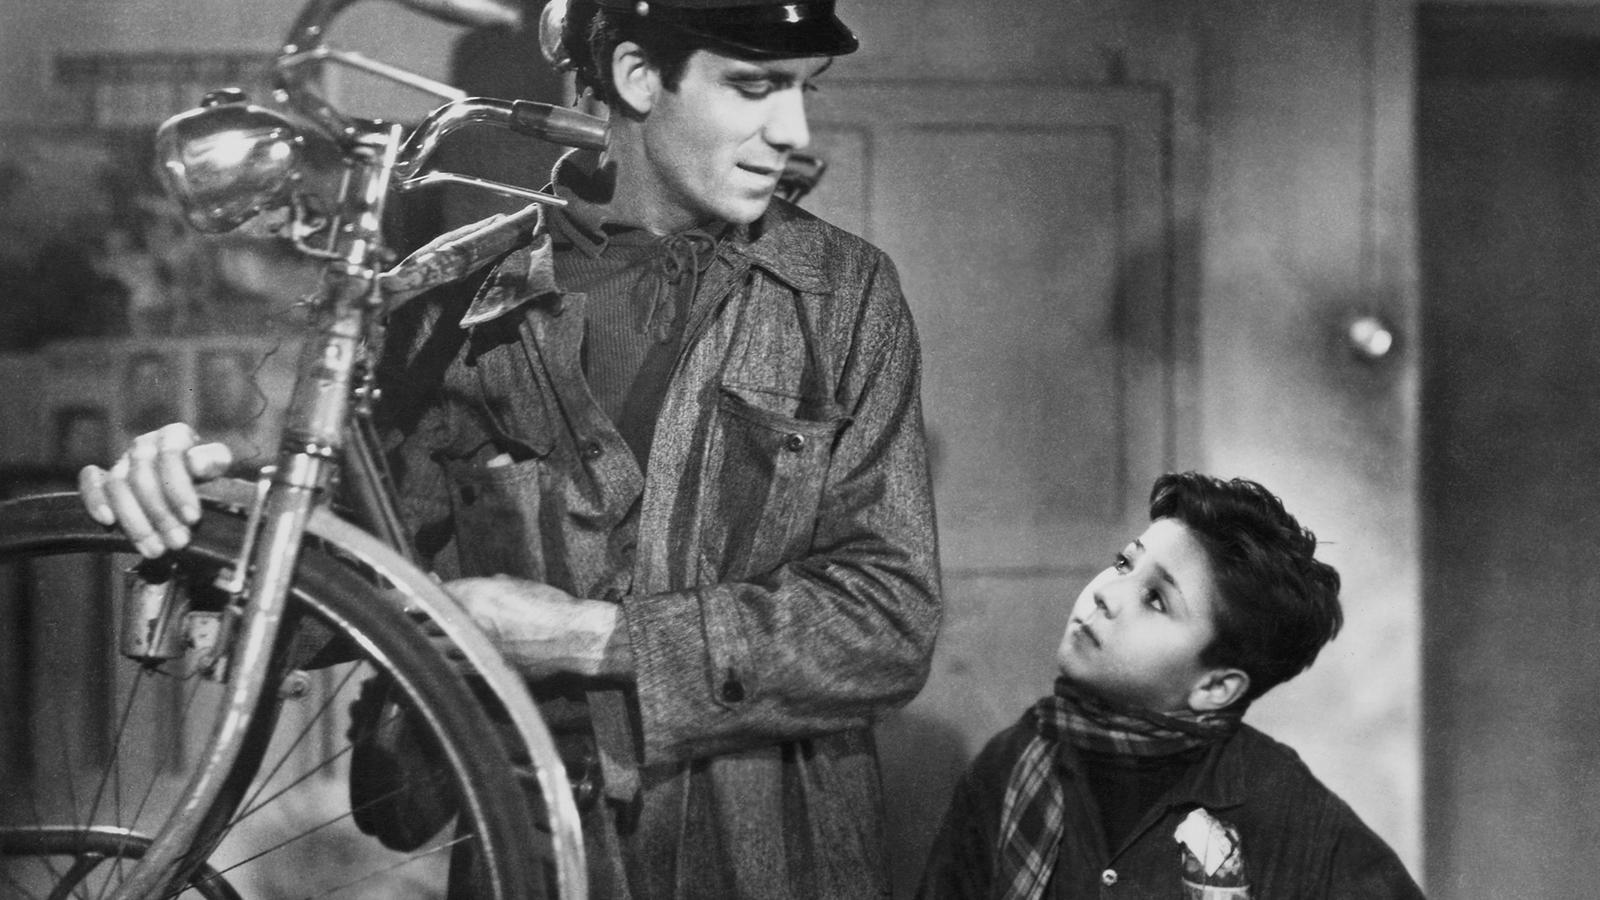 The Bicycle Thieves (1948)